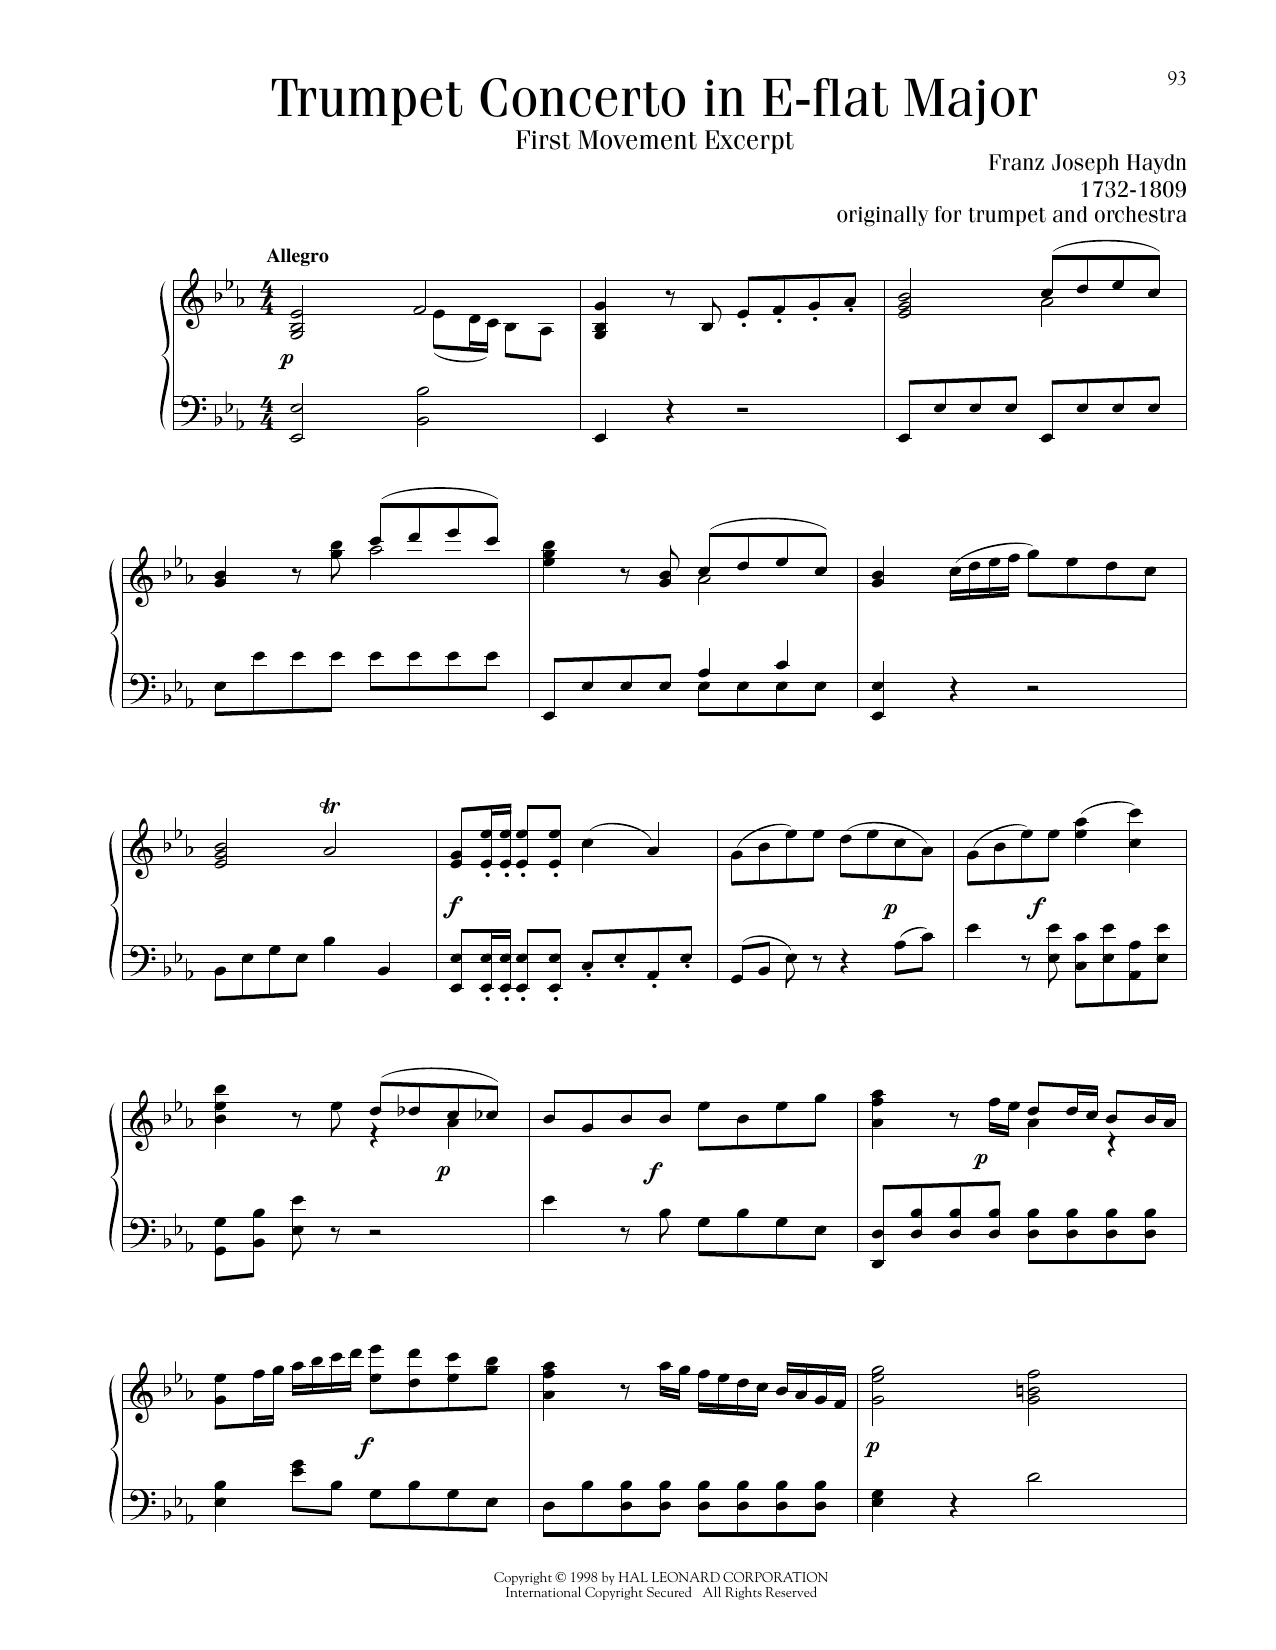 Franz Joseph Haydn Trumpet Concerto in E-flat Major, First Movement Excerpt sheet music notes printable PDF score